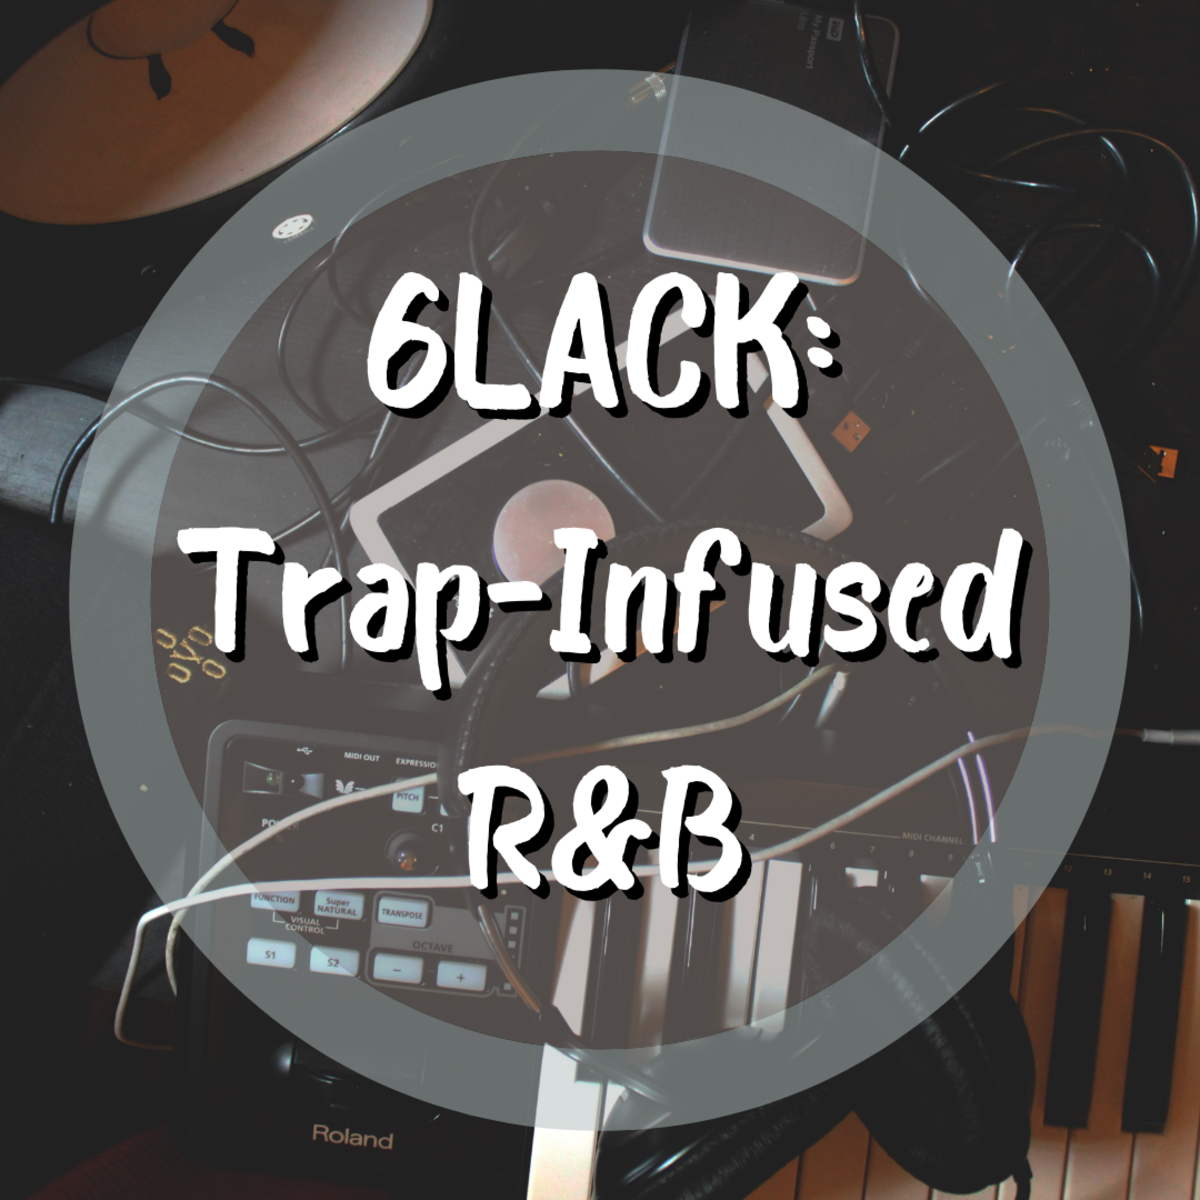 This article introduces you to artist 6LACK, an enigmatic musician who creates a style of R&B that incorporates Trap.